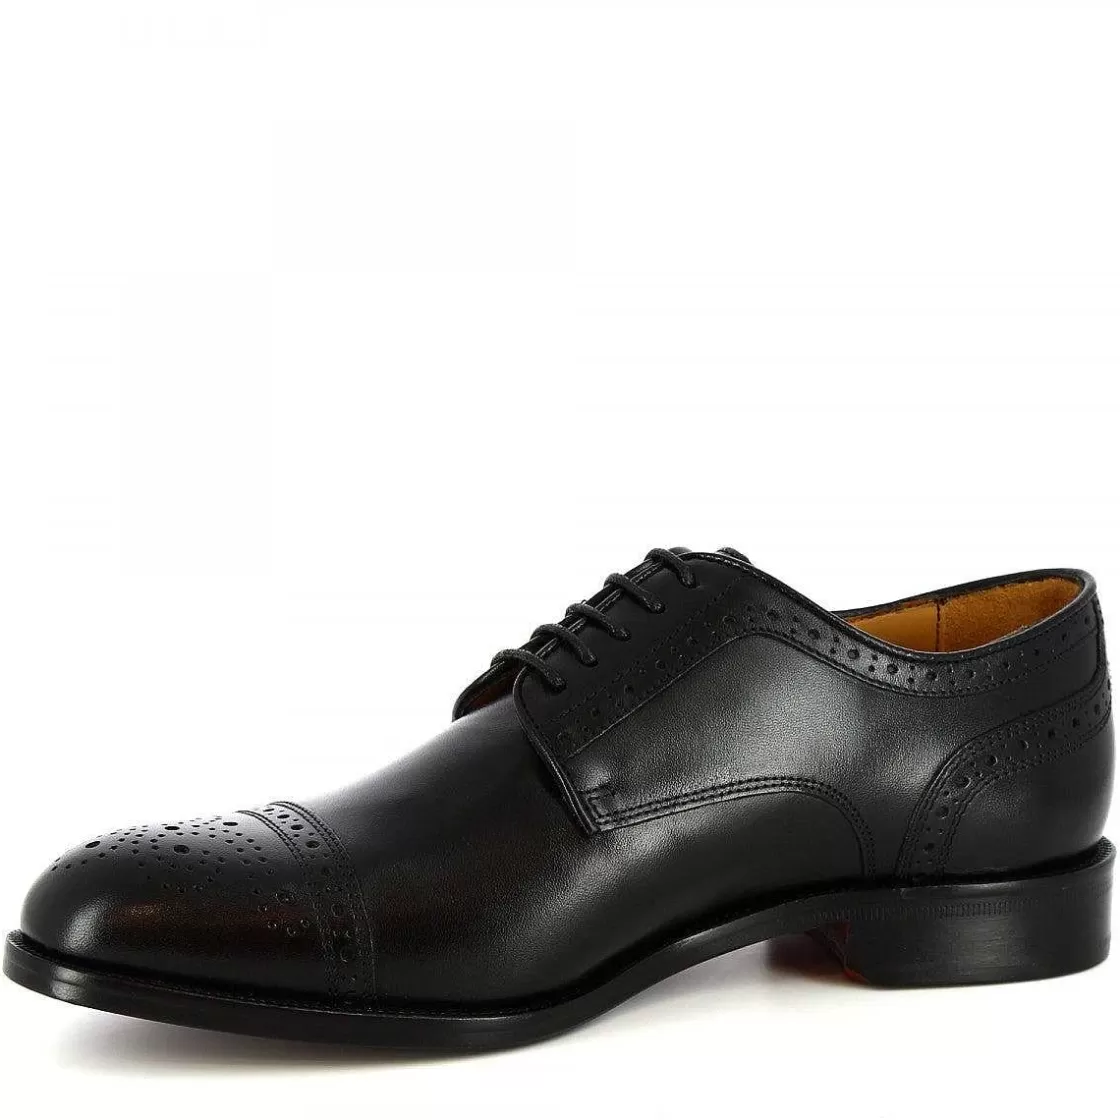 Leonardo Men'S Handmade Brogues Shoes In Black Leather Calfskin With Tip Fashion